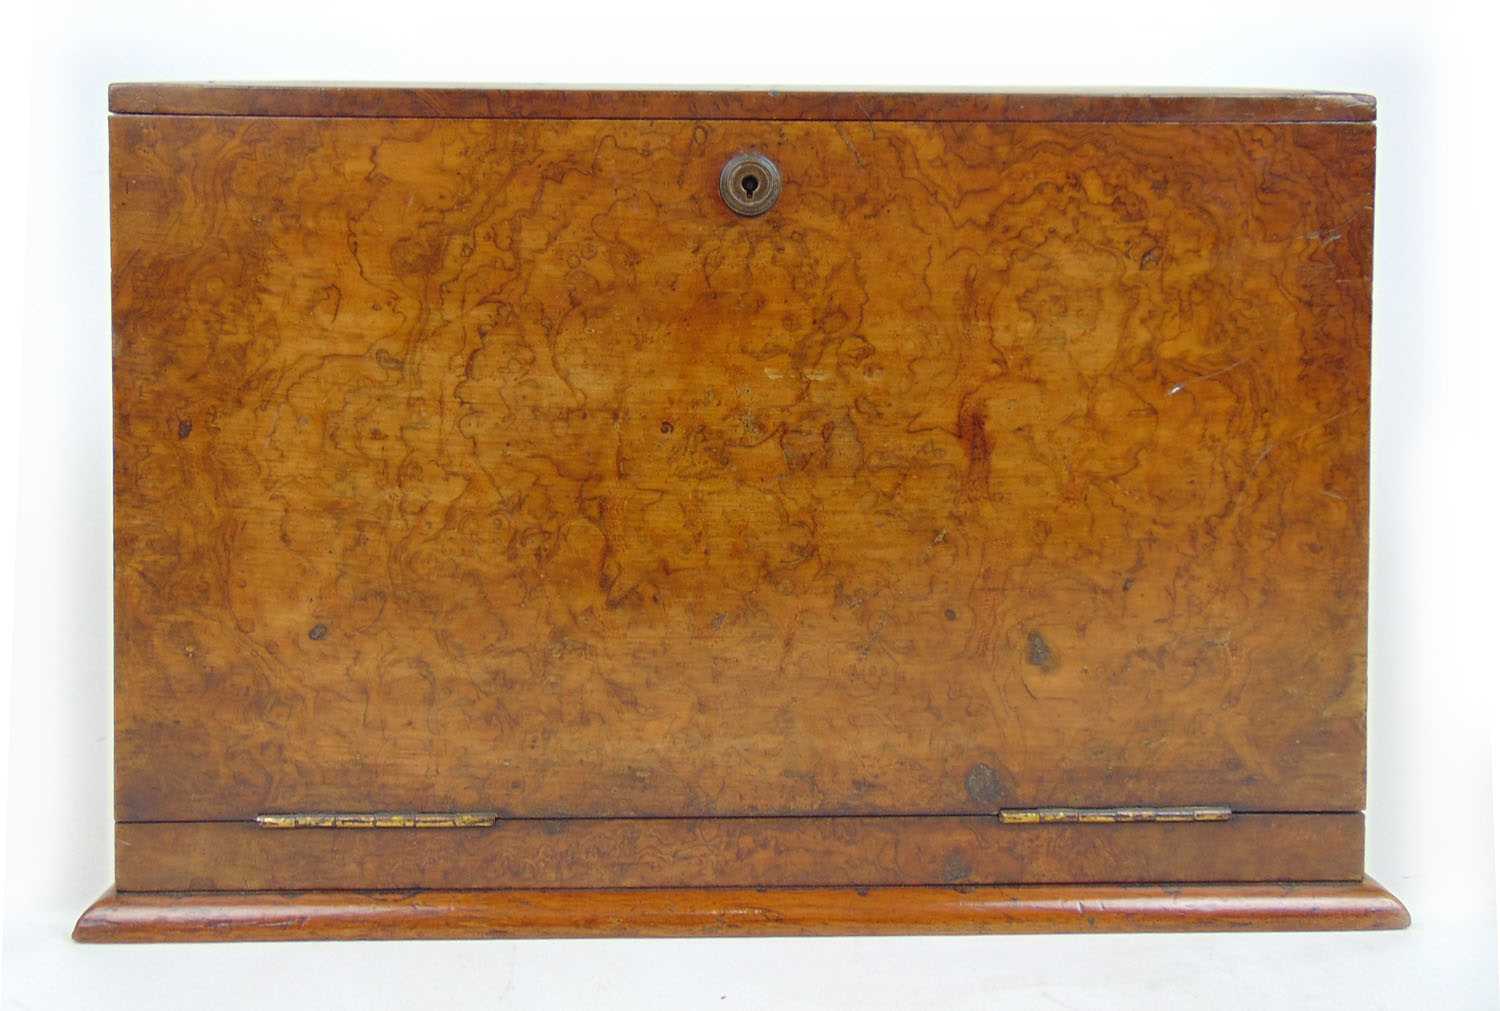 A 19th century burr walnut ladies travelling desk with brass carry handles. No key so interior